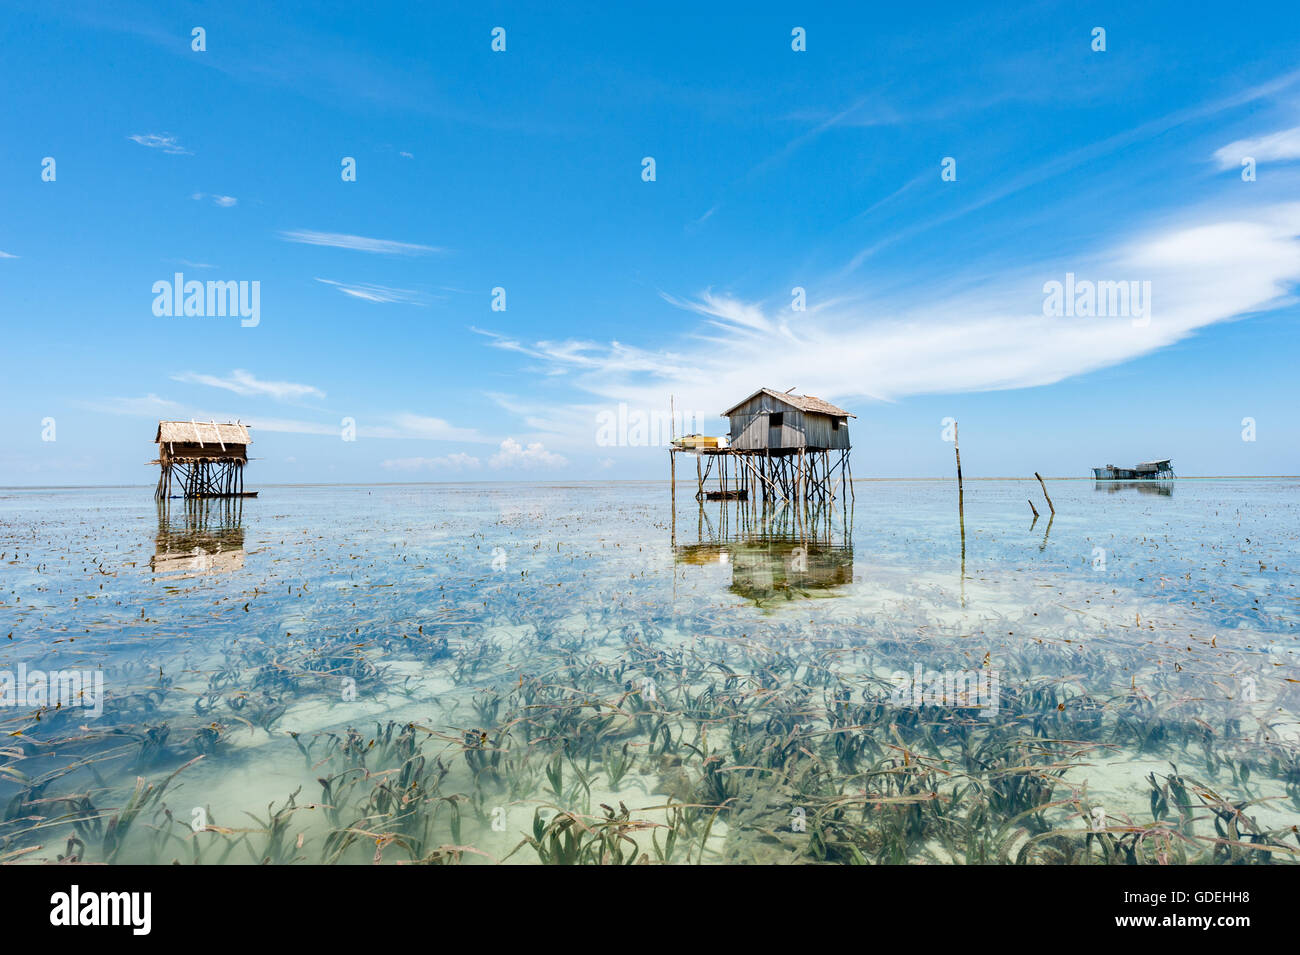 Wooden huts on stilts in ocean, Semporna, Sabah, Malaysia Stock Photo